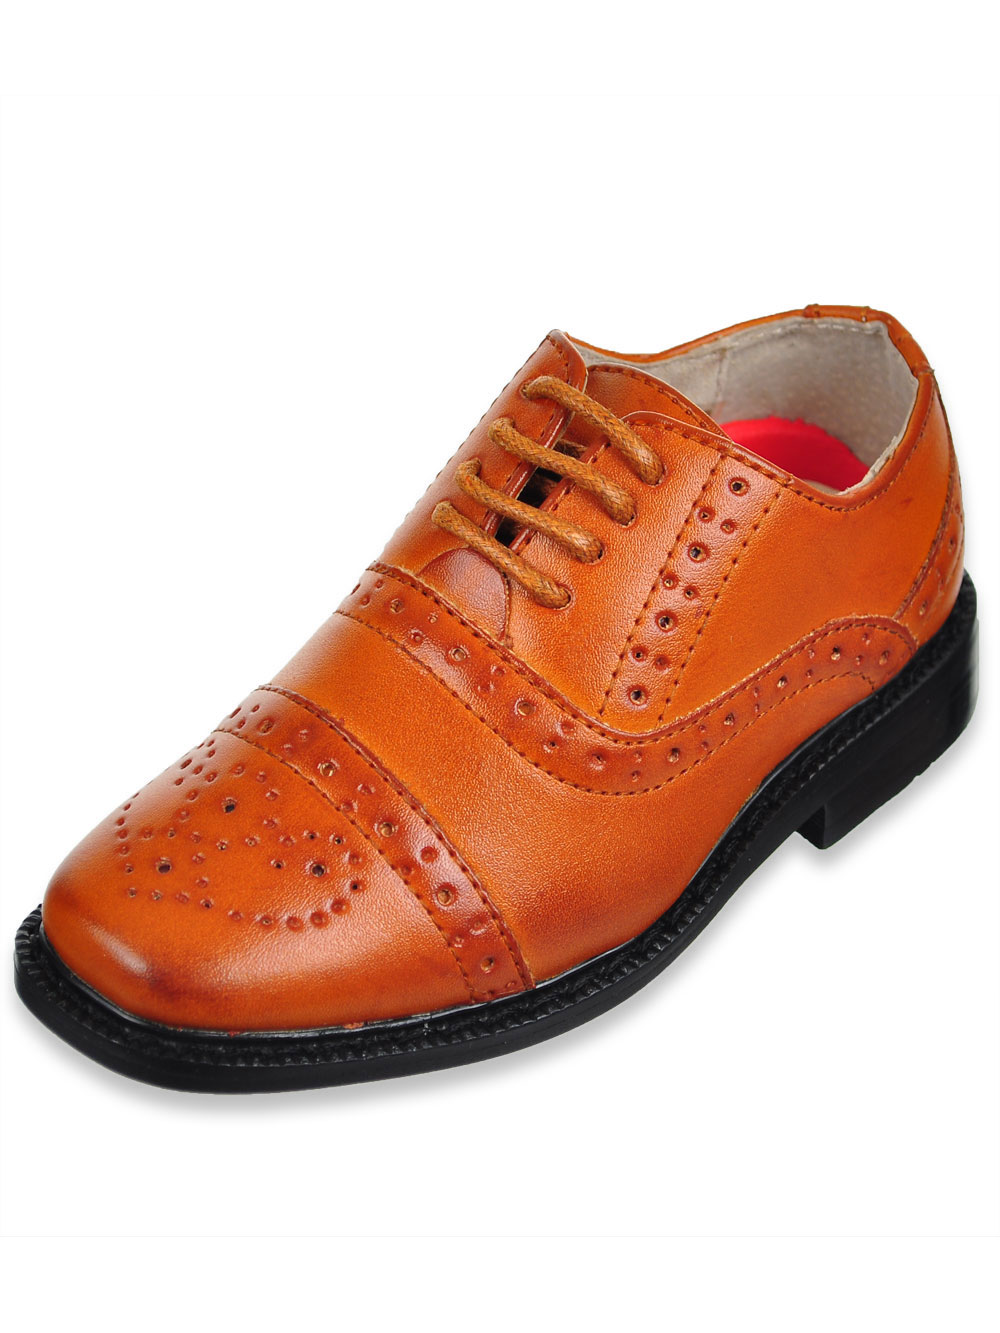 Size 6 Youth Dress Shoes for Boys